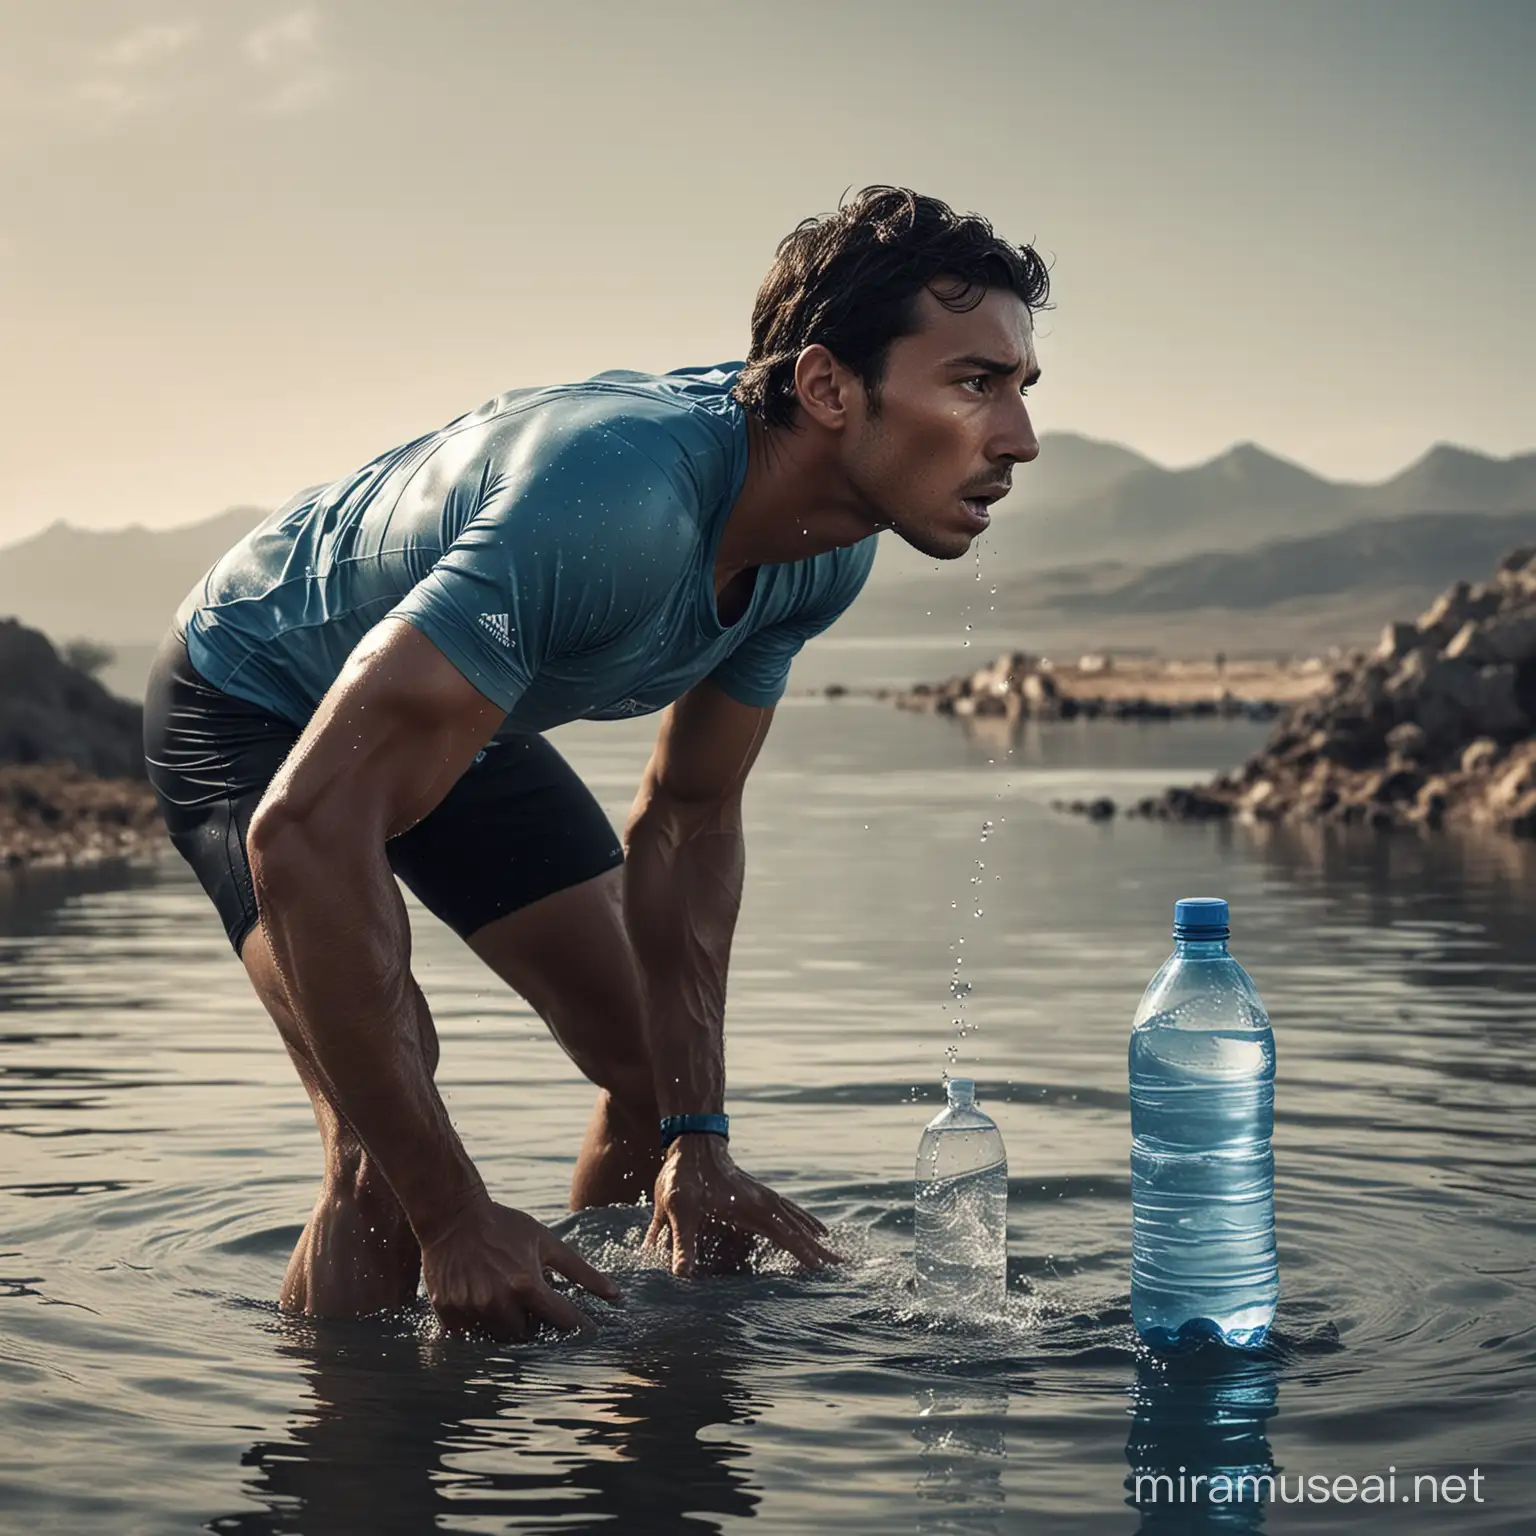 Thirsty Athlete Embracing Hope Symbolic Representation of Water Security